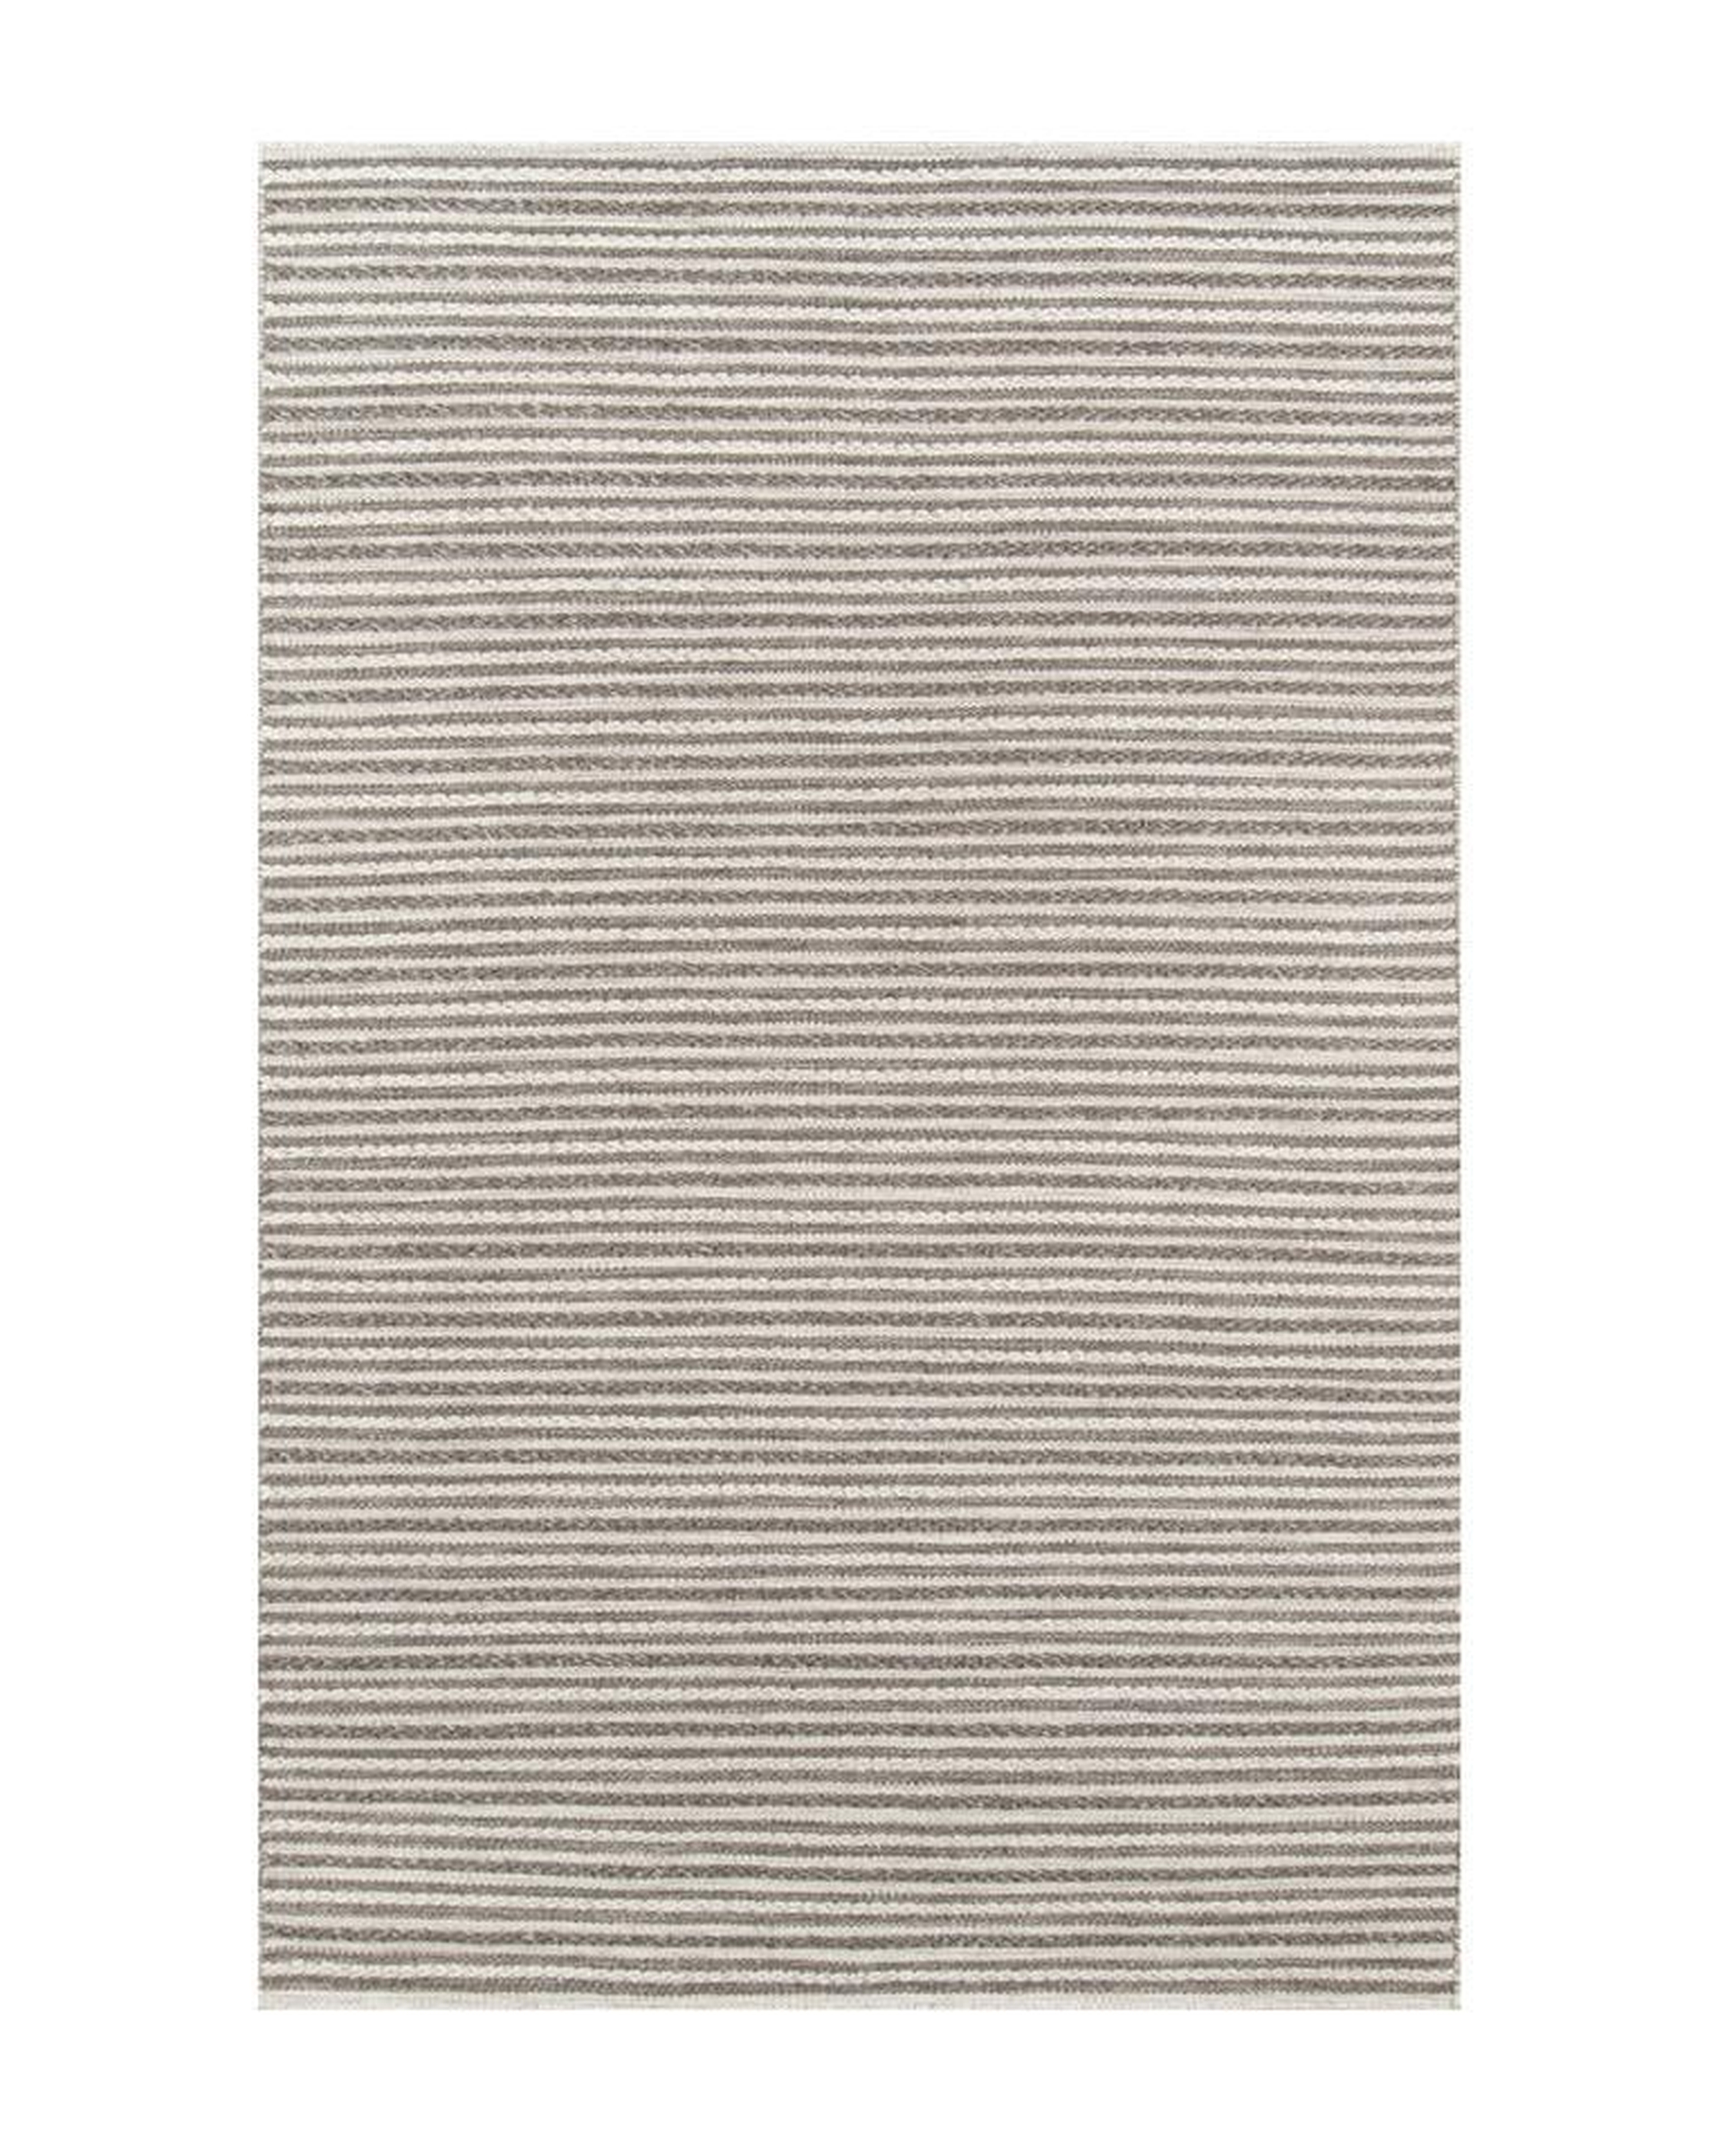 COVENTRY HAND-WOVEN WOOL RUG, 9' x 12' - McGee & Co.